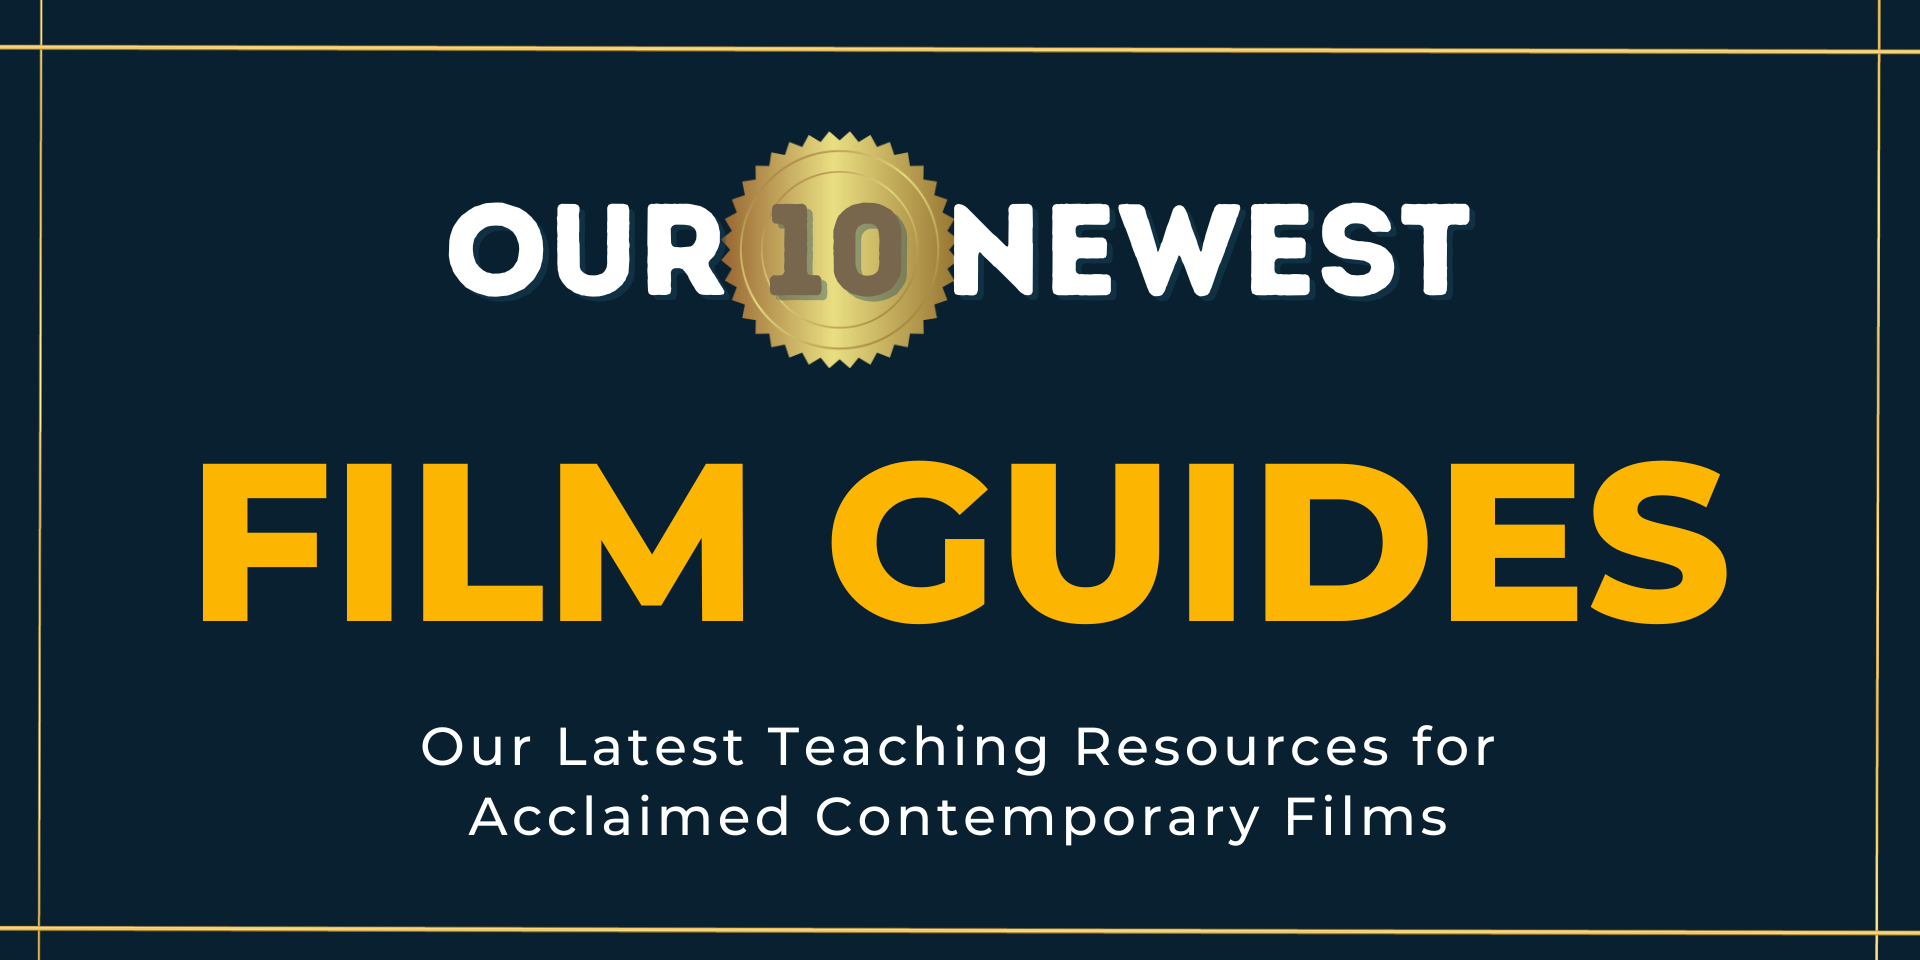 Text reads: Our Ten Newest Film Guides, in bold more prominent text. Smaller text: Our latest teaching resources for acclaimed contemporary films. 